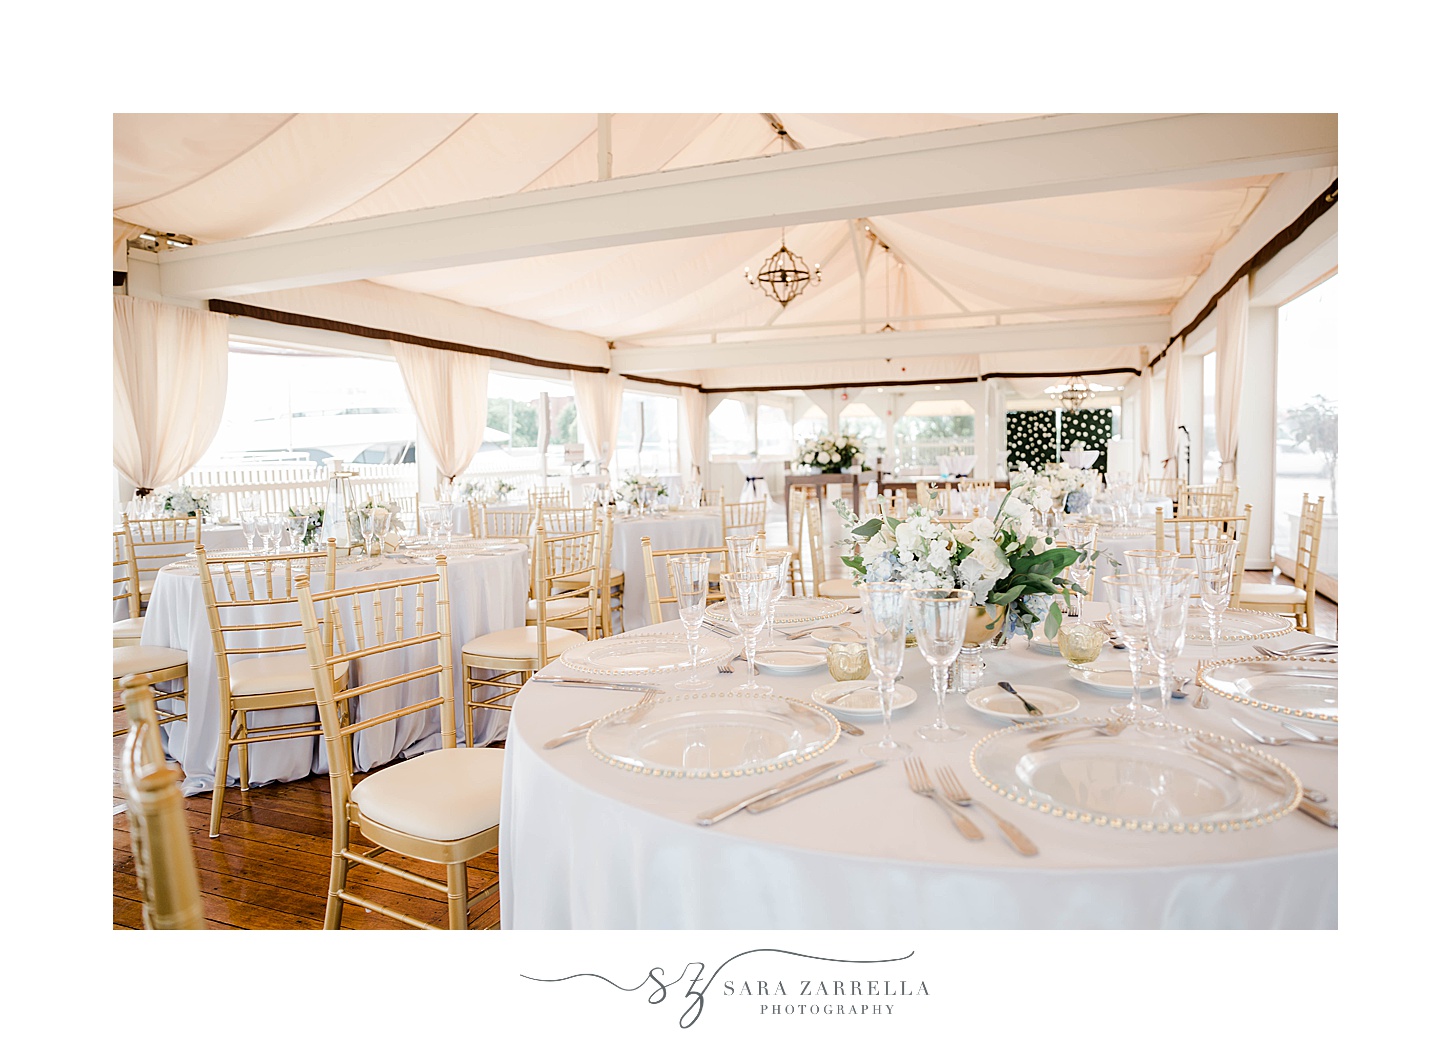 Regatta Place wedding reception with white and gold details 